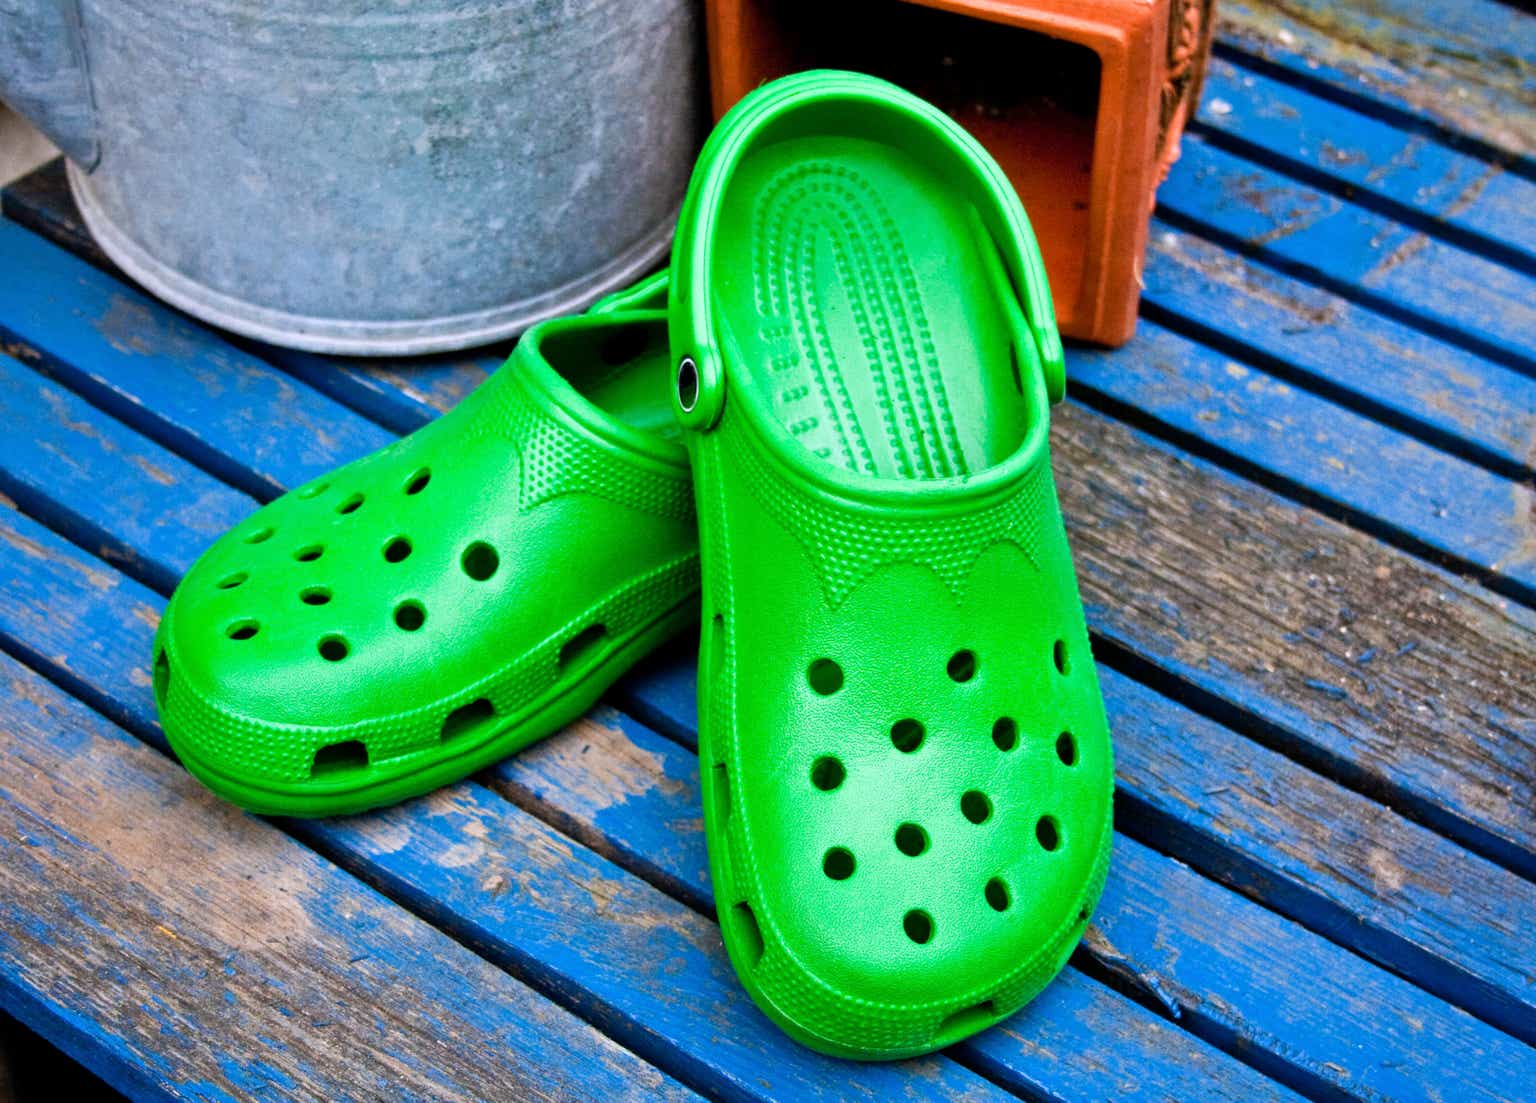 Here's How Crocs Inc. Plans to Grow Hey Dude Amid Slowing Sales